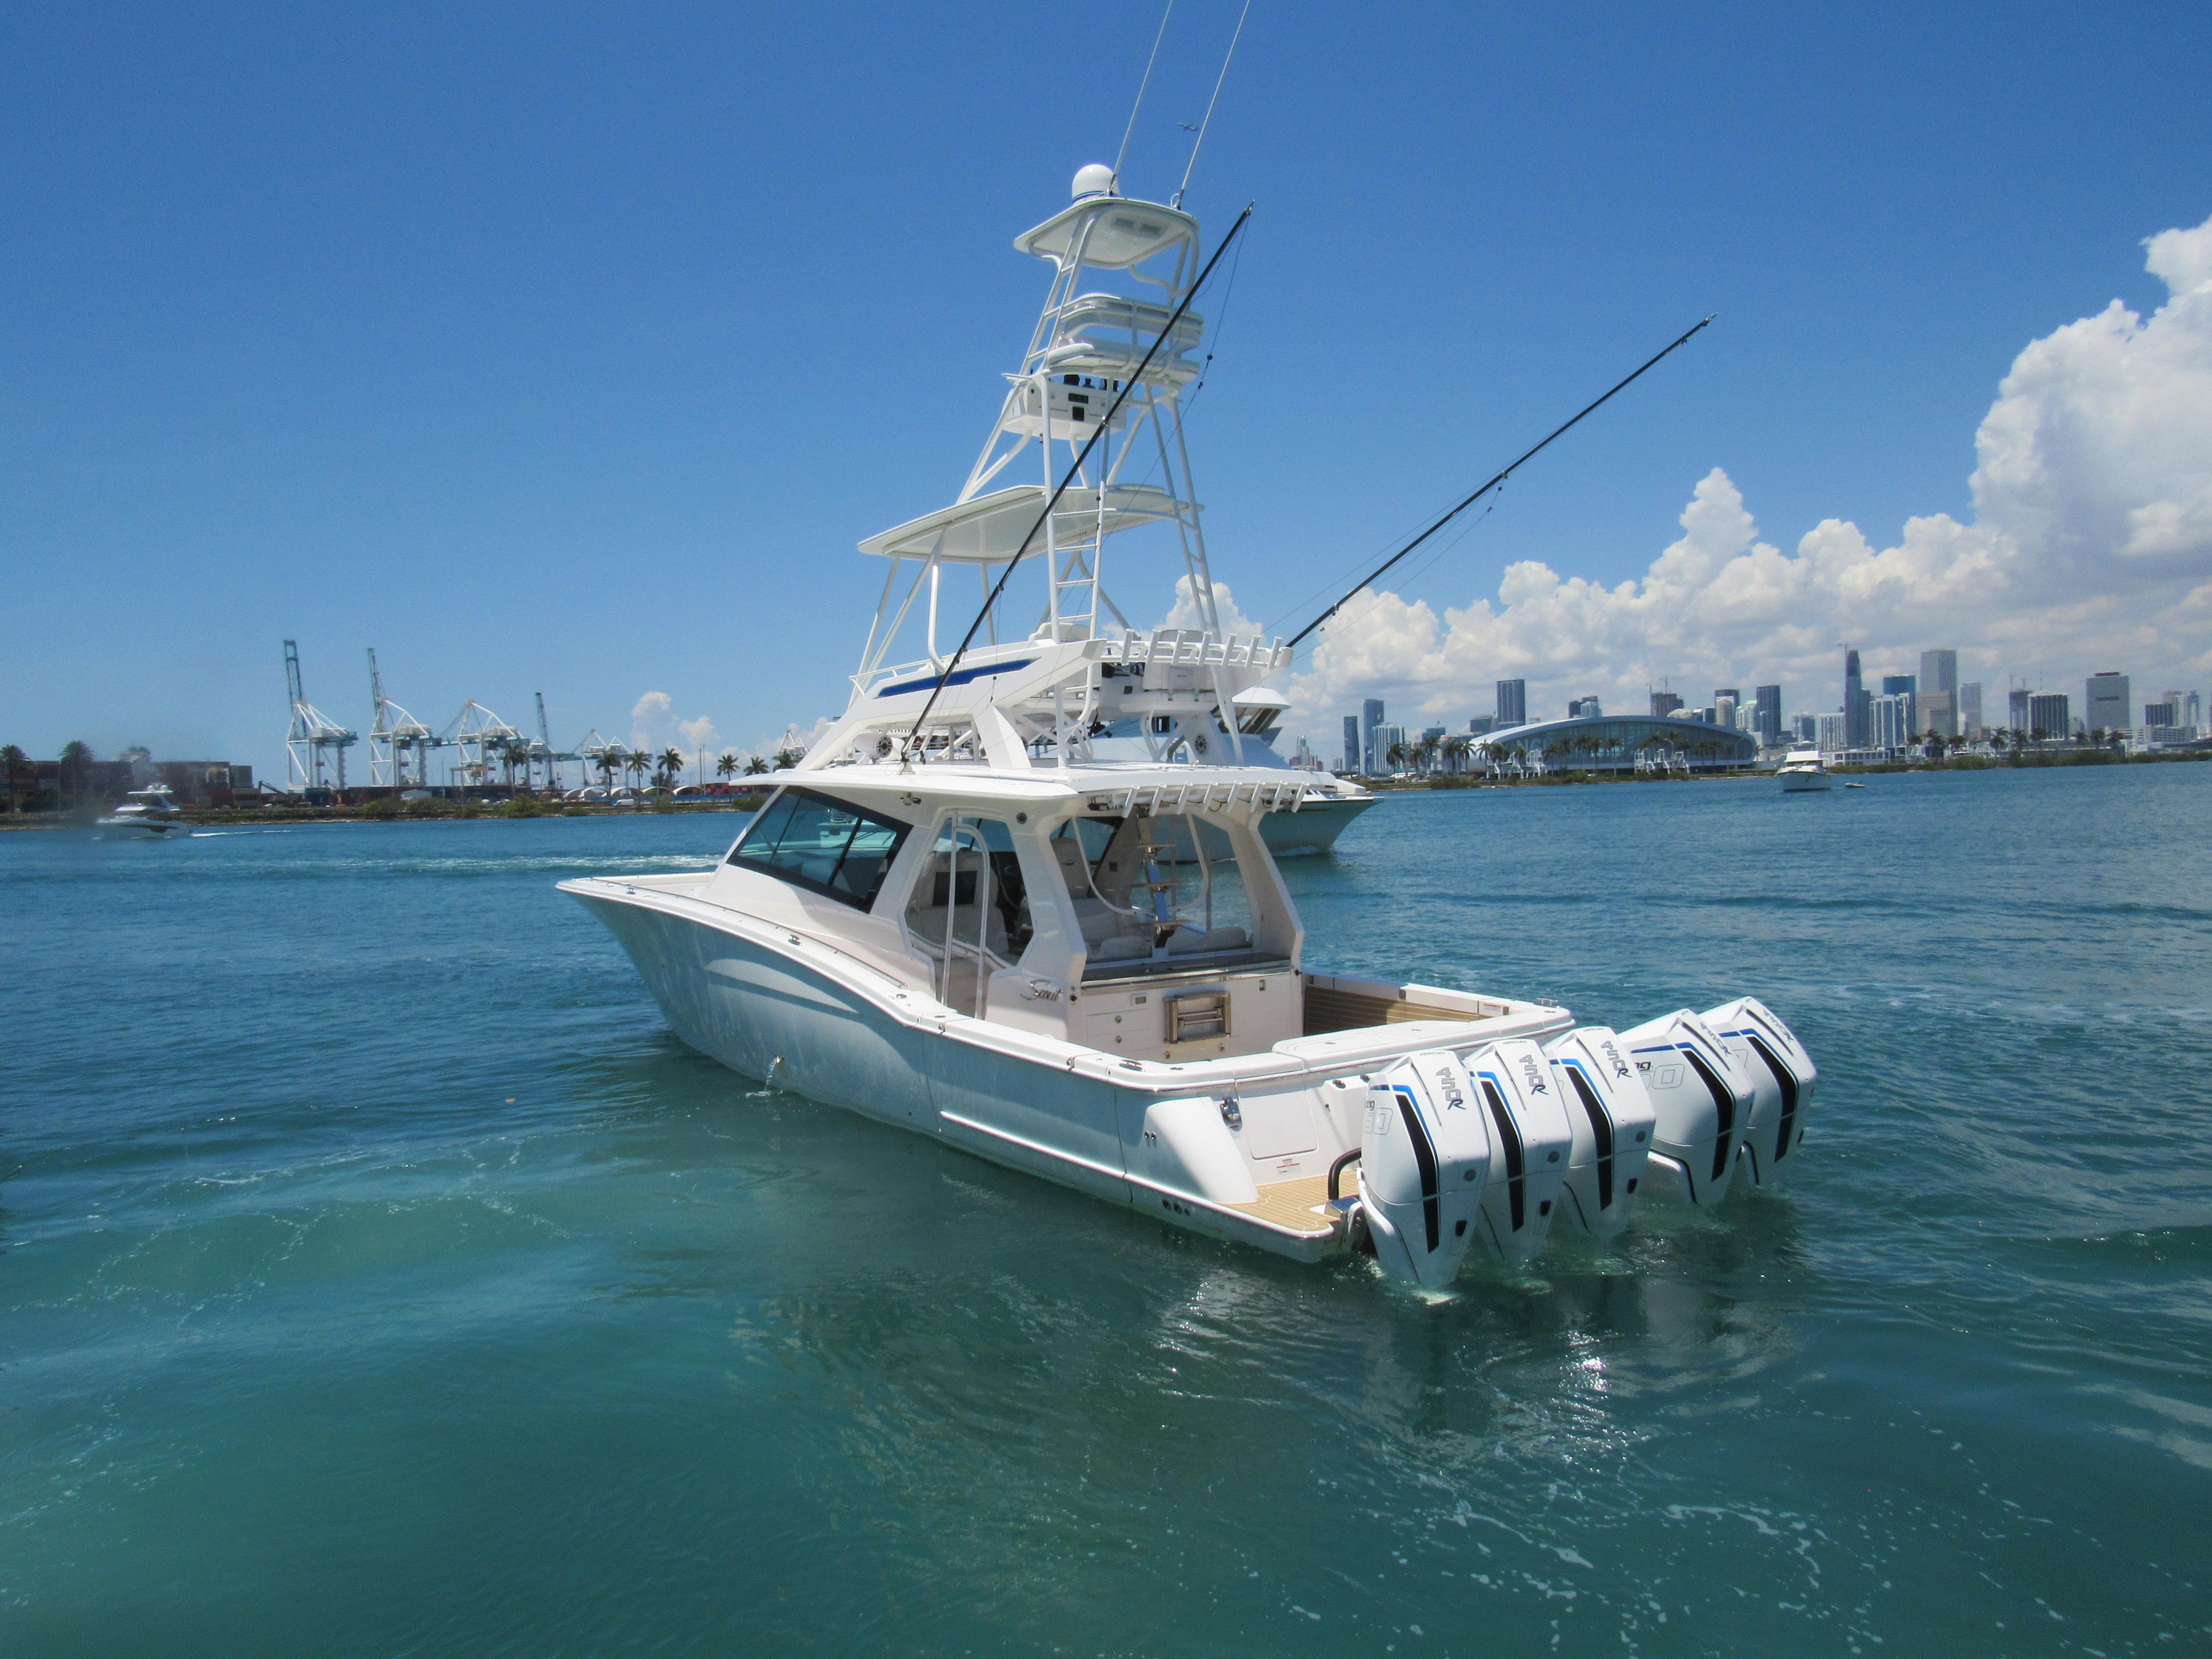 53 Scout 530 LXF 2021 "THE COOP" HMY Yachts